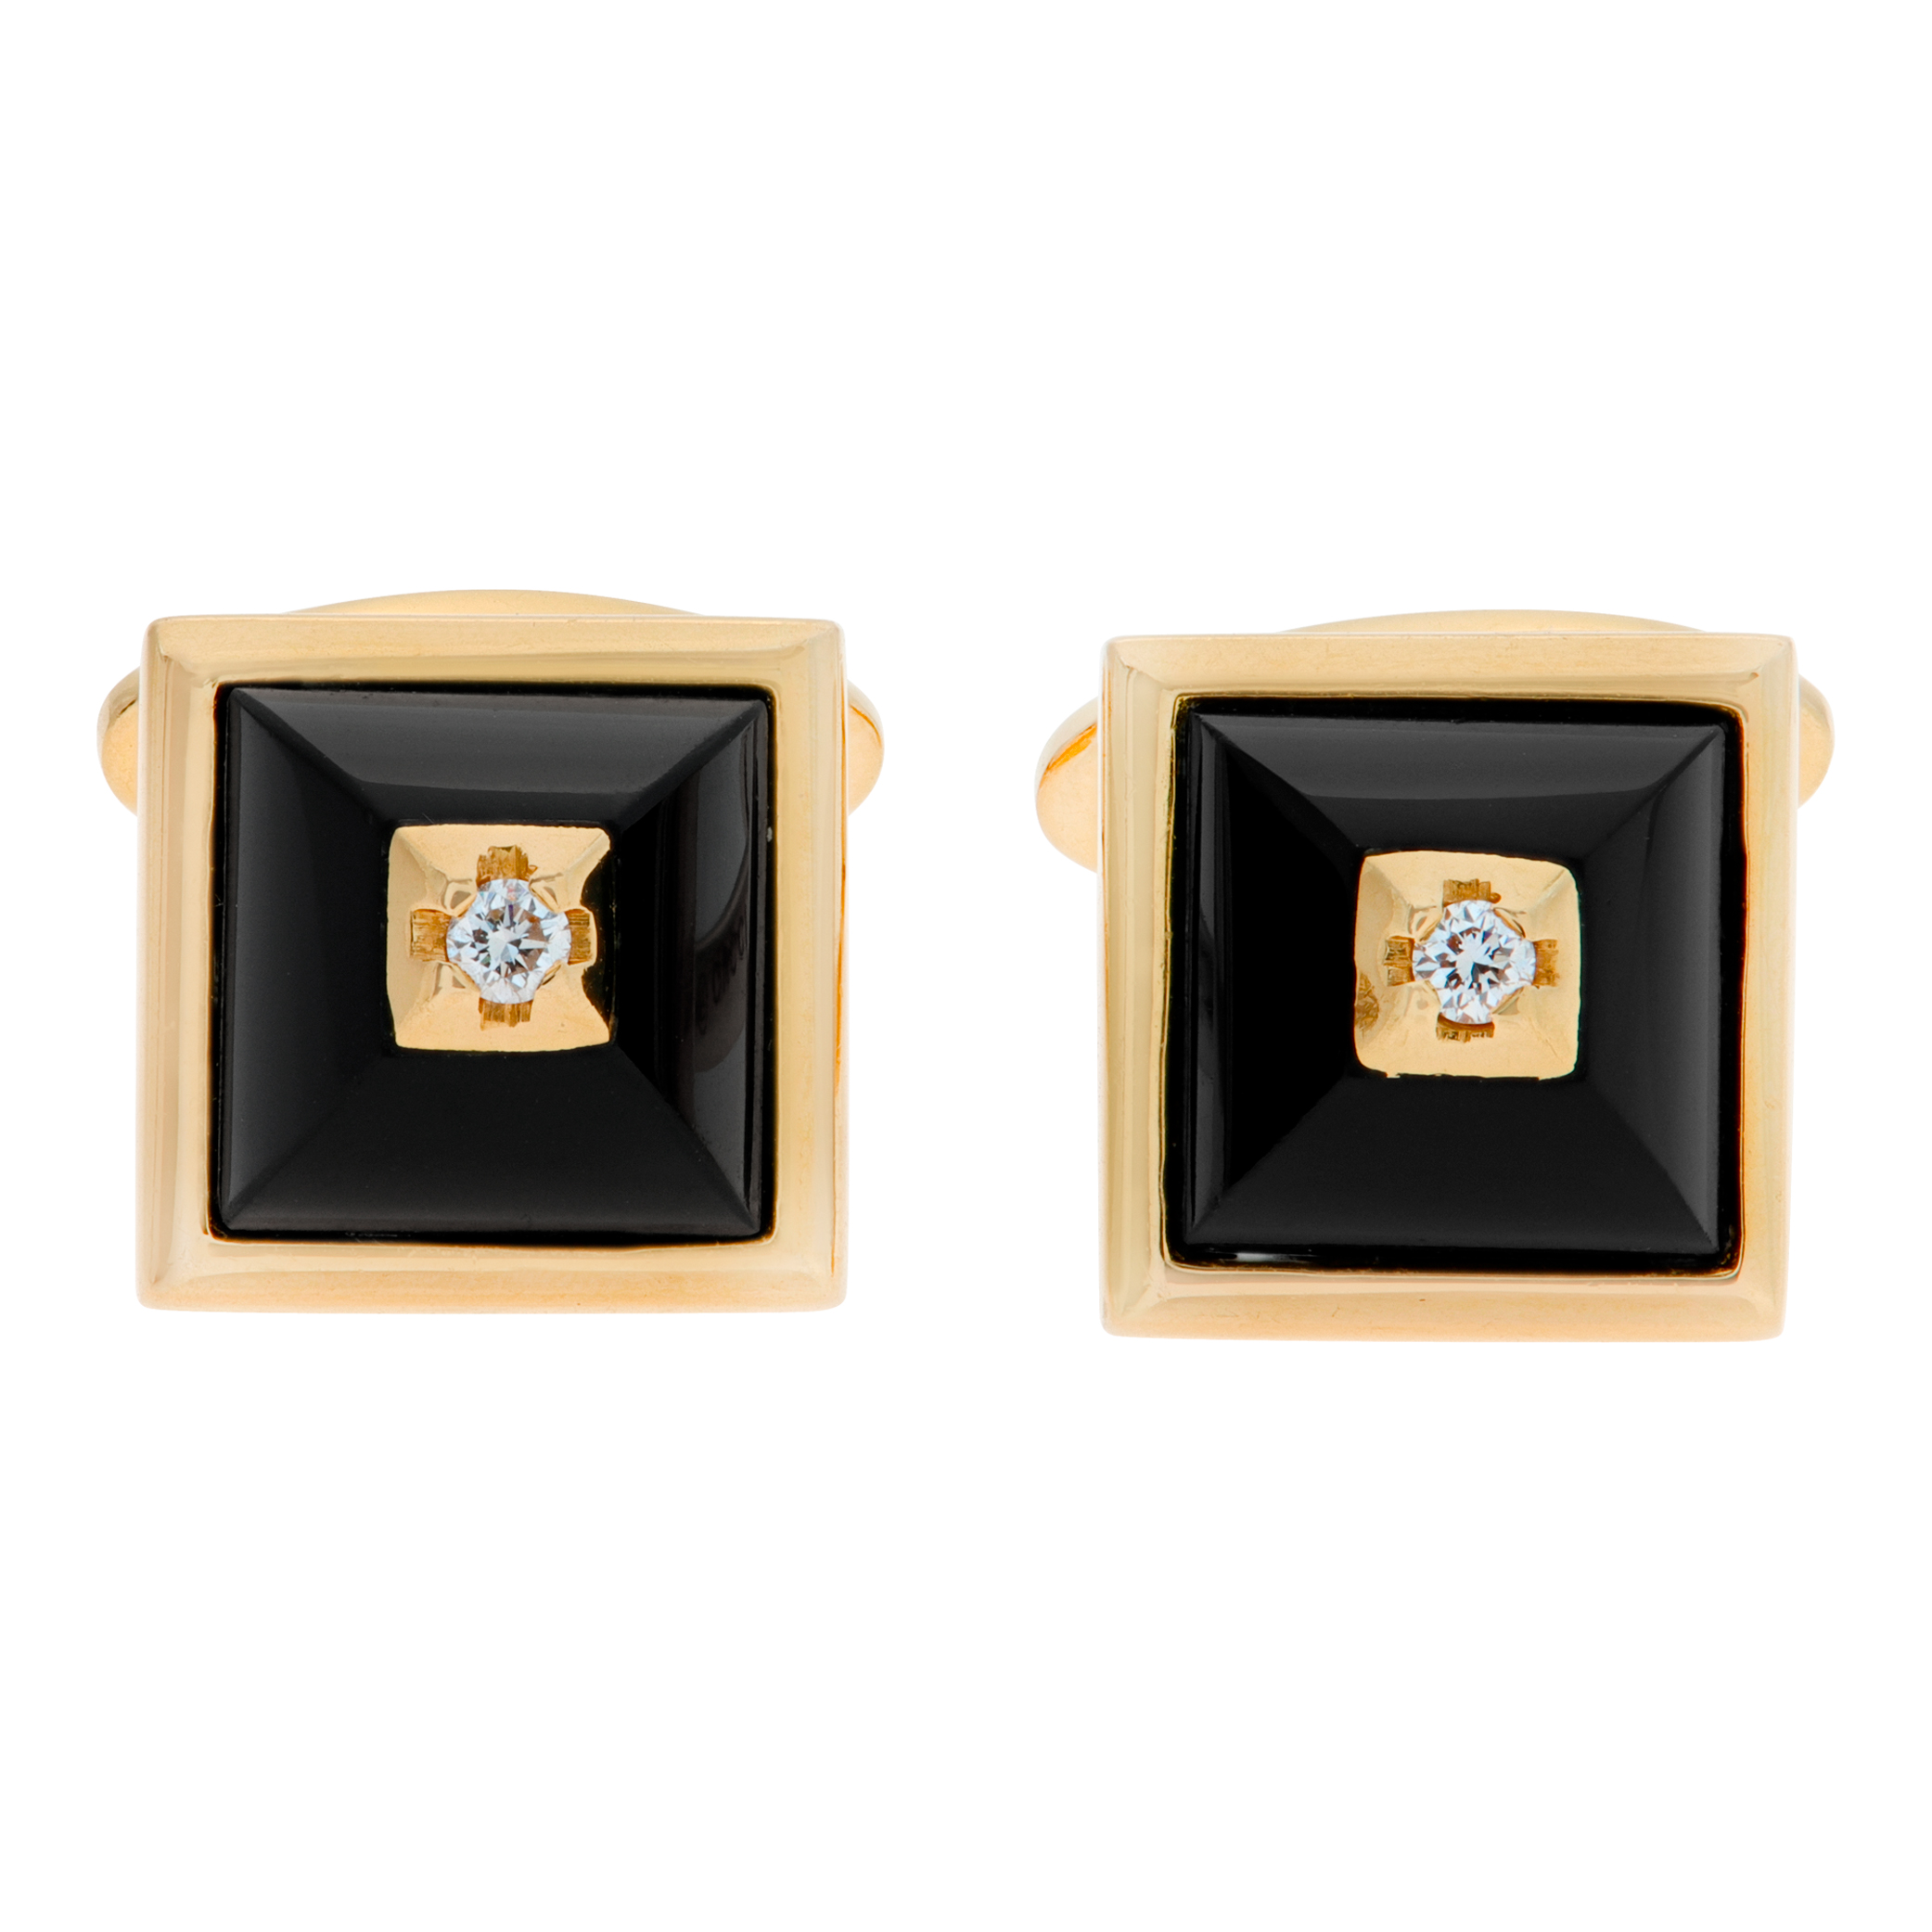 Gucci cufflinks in 18k with pyramid shaped stone accented with diamond center